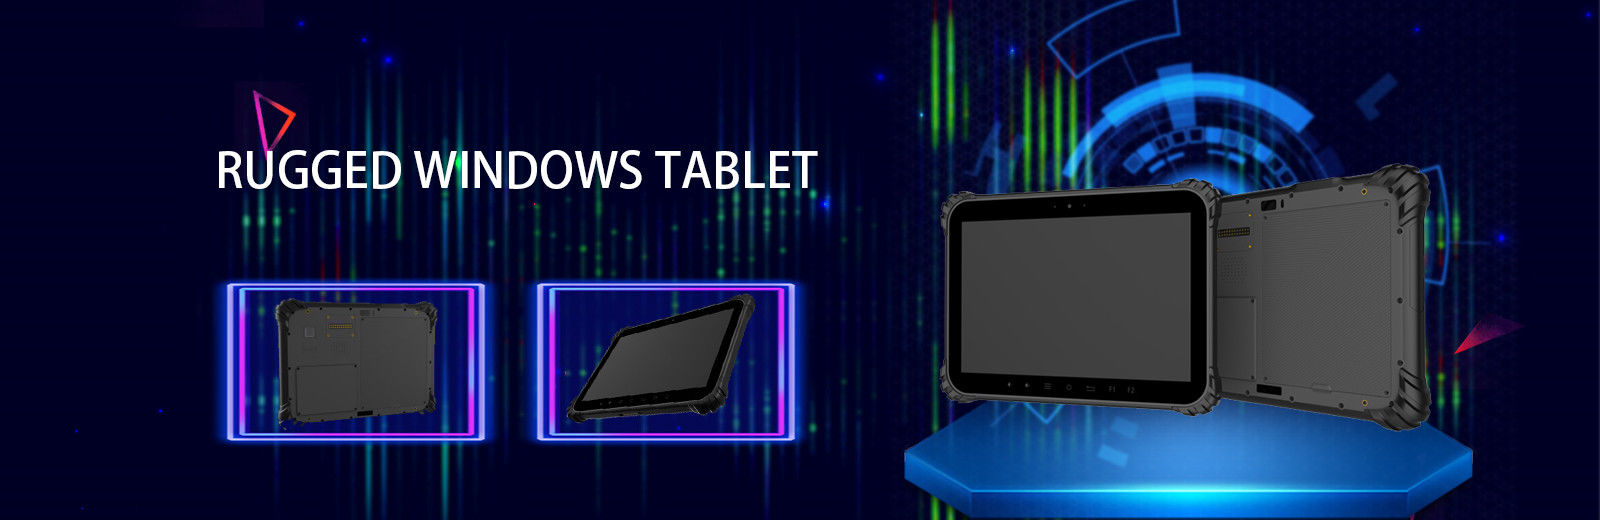 Schroffe PC Tablets